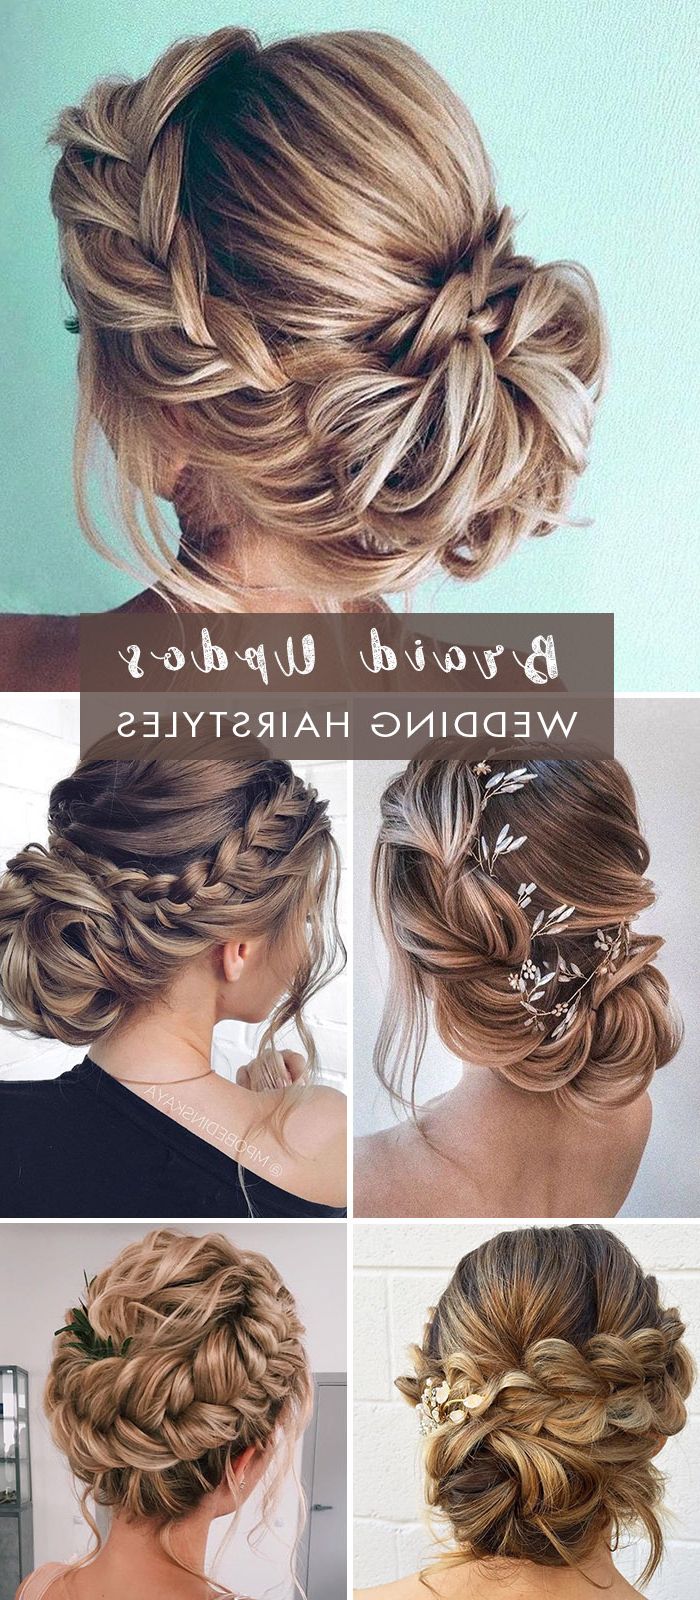 20 Easy And Perfect Updo Hairstyles For Weddings – Ewi Inside Bridesmaid’s Updo For Long Hair (View 6 of 25)